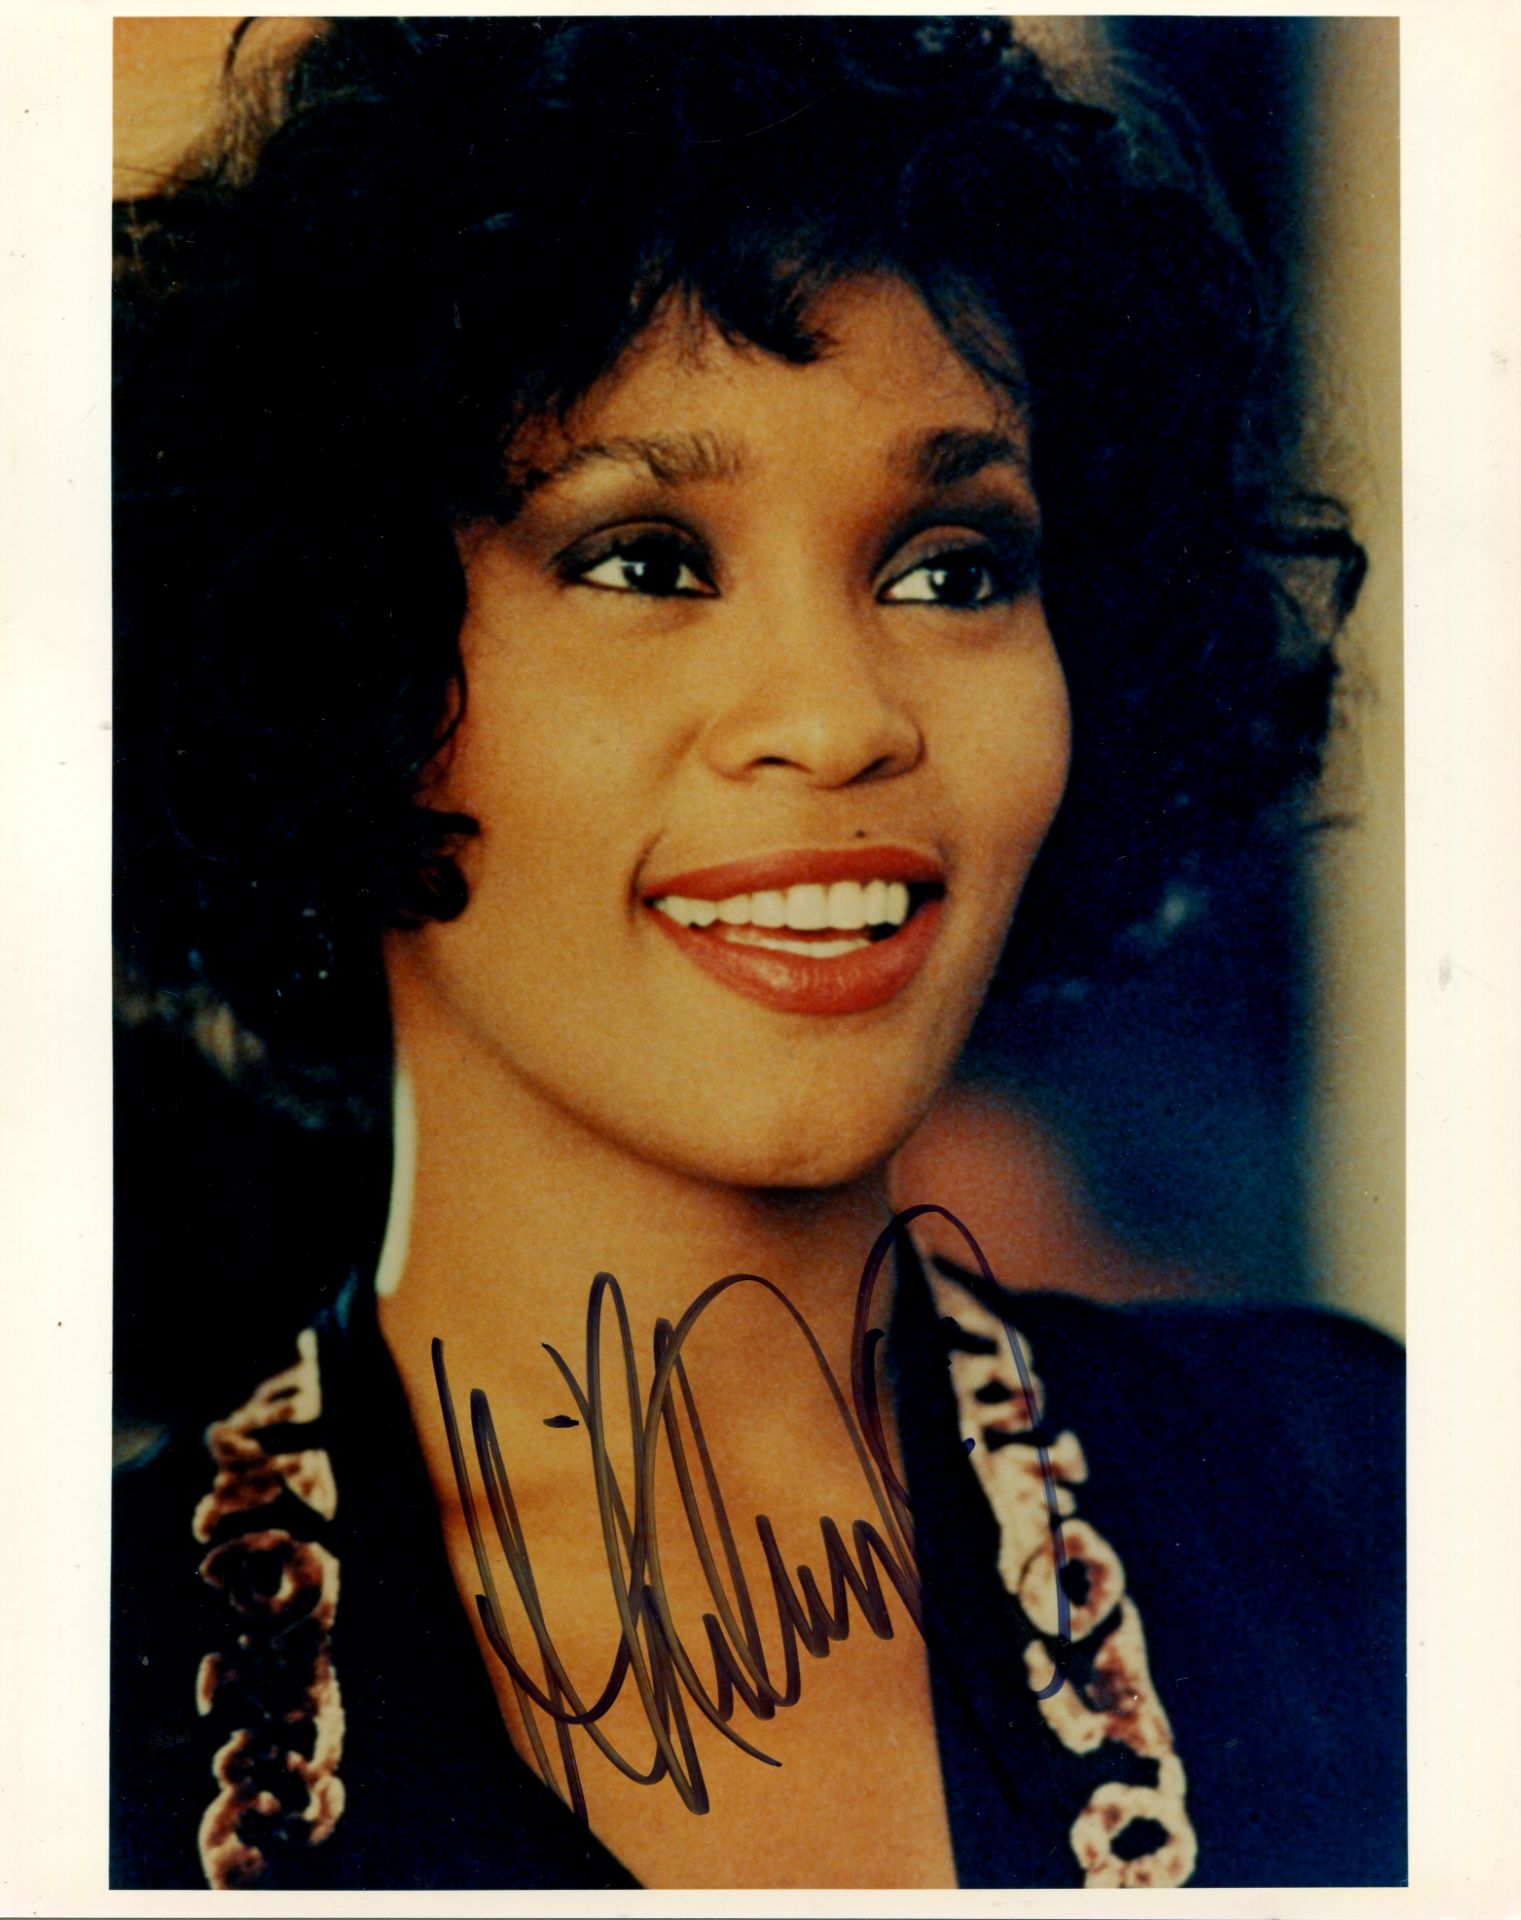 HOUSTON WHITNEY: (1963-2012) American Singer and Actress.